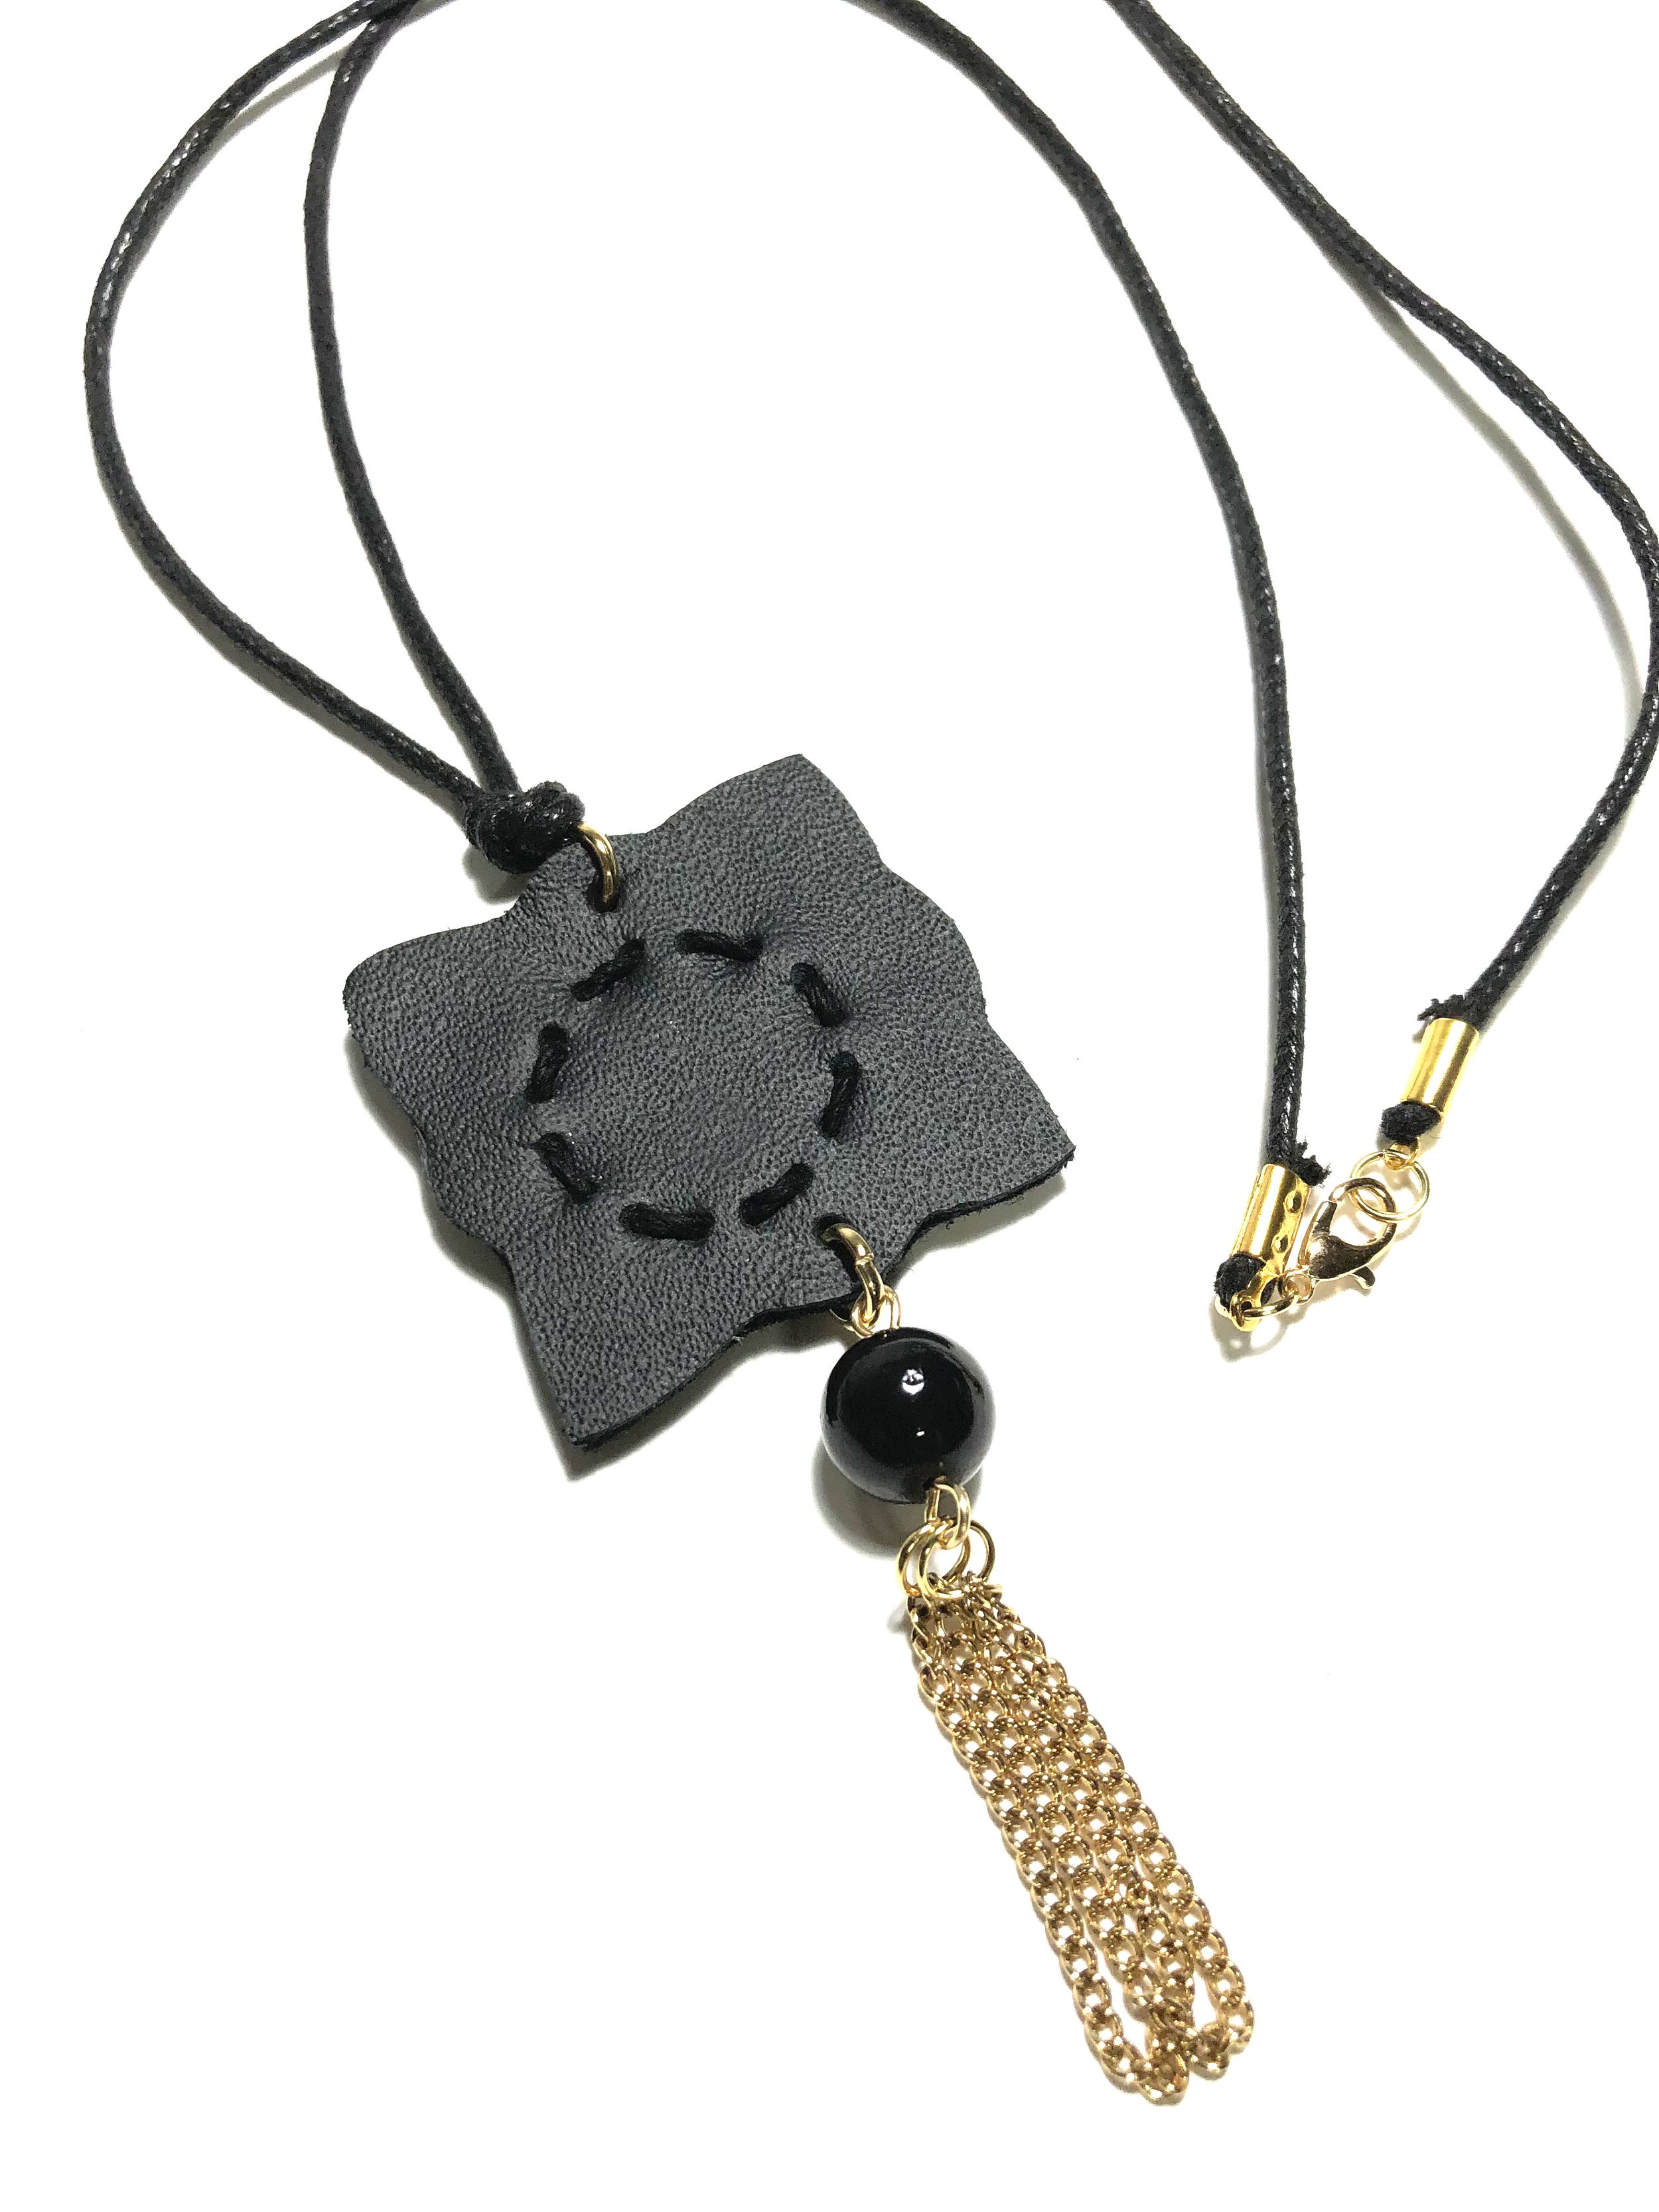 Clover leather necklace with bead and chain accent by Black & Gold Fashions (5).JPG